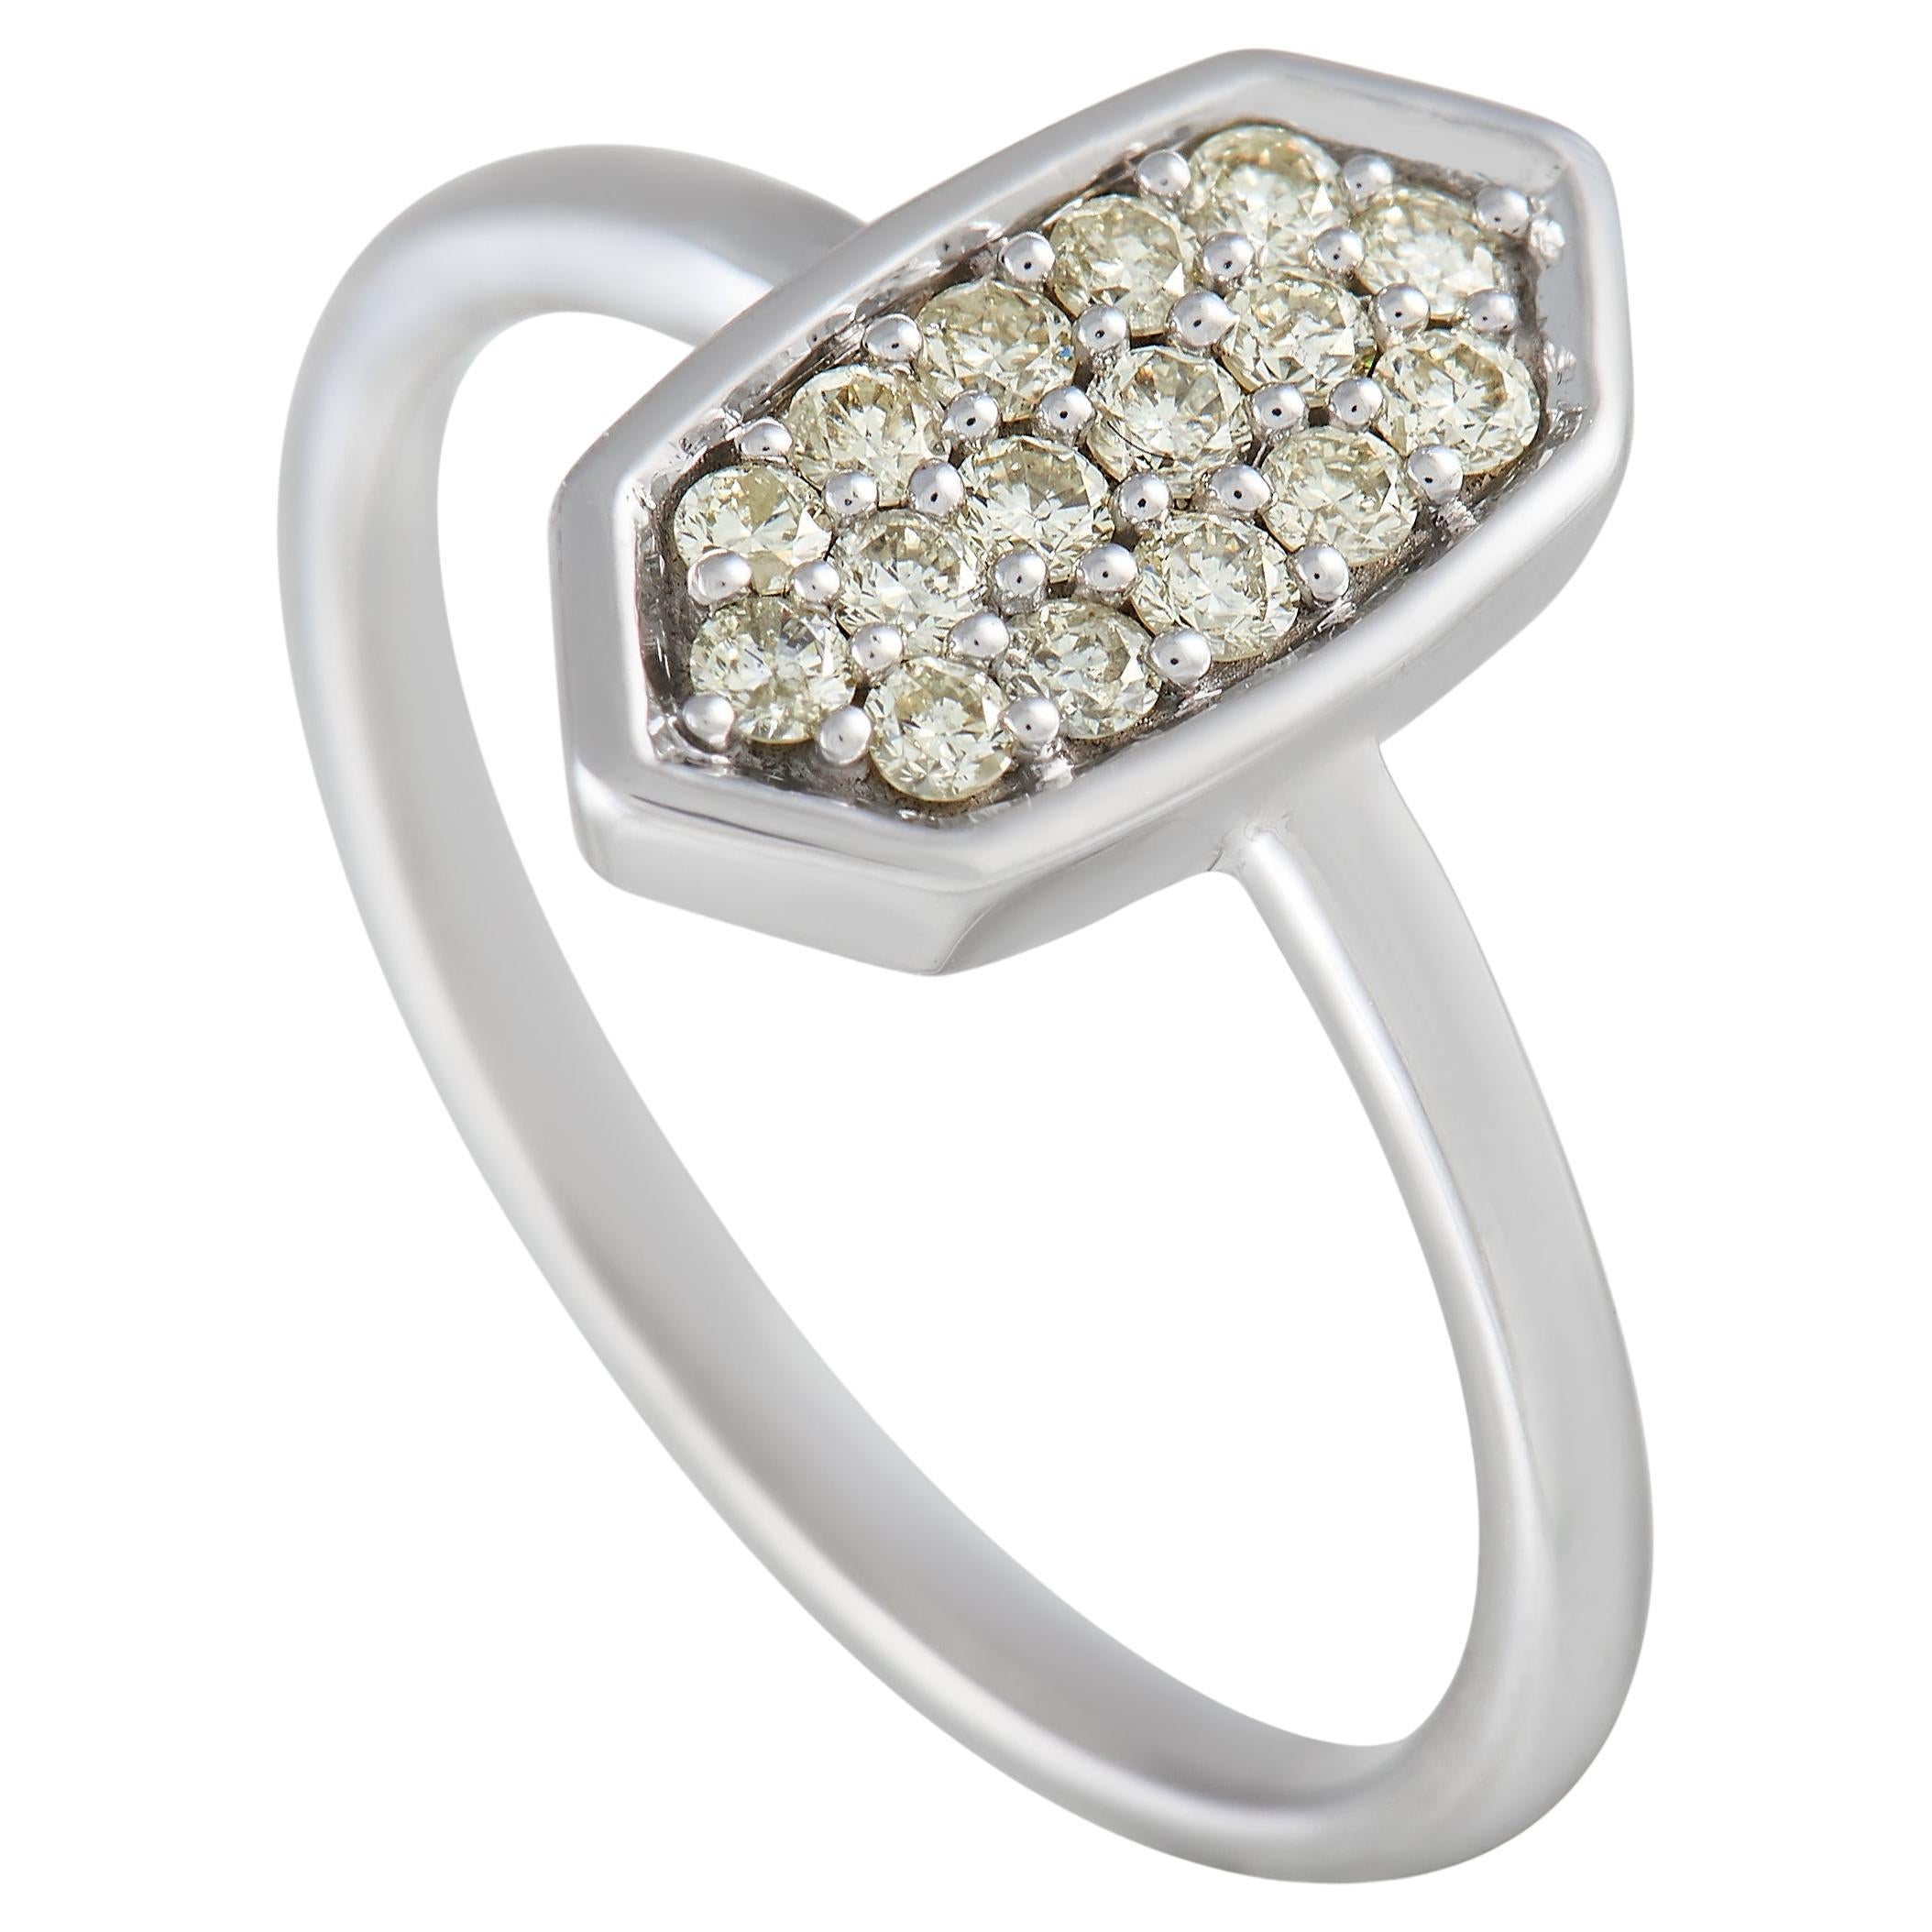 LB Exclusive 14K White Gold 0.31 ct Diamond Ring For Sale